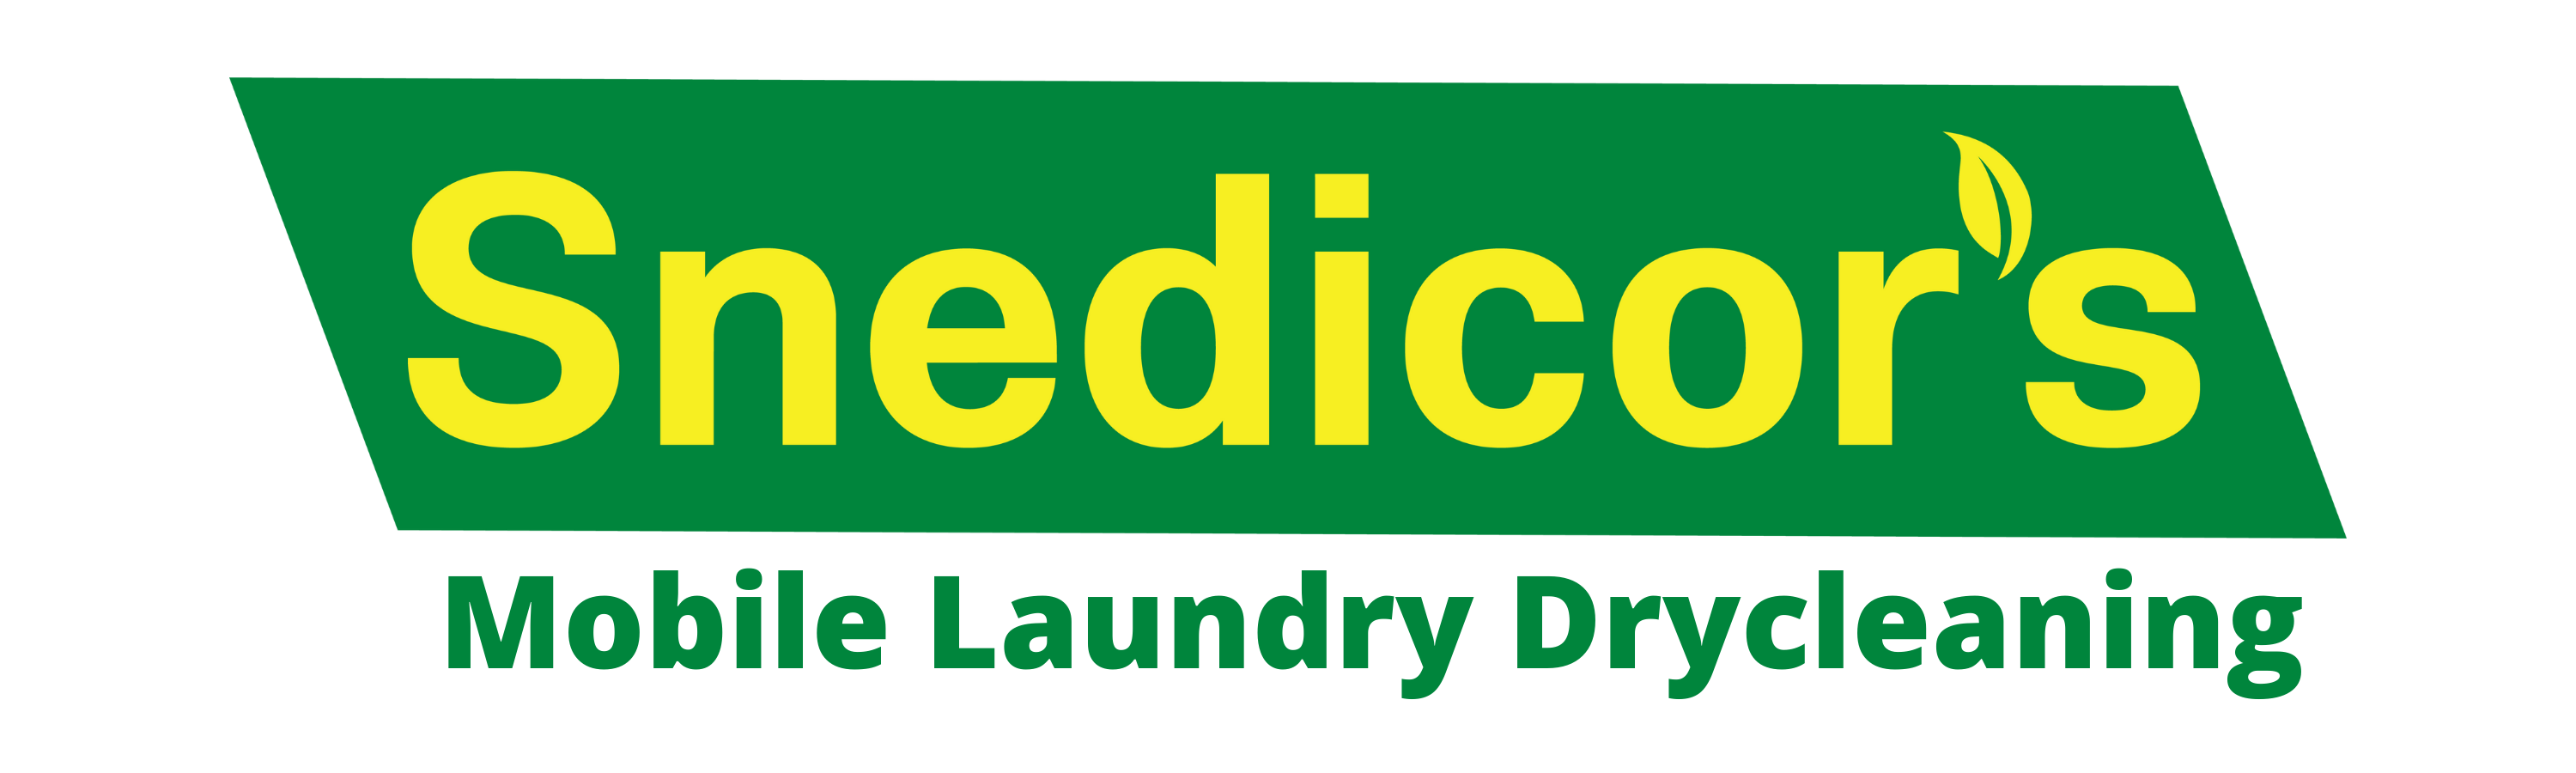 Mobile Laundry & Drycleaning (3000 × 900 px)